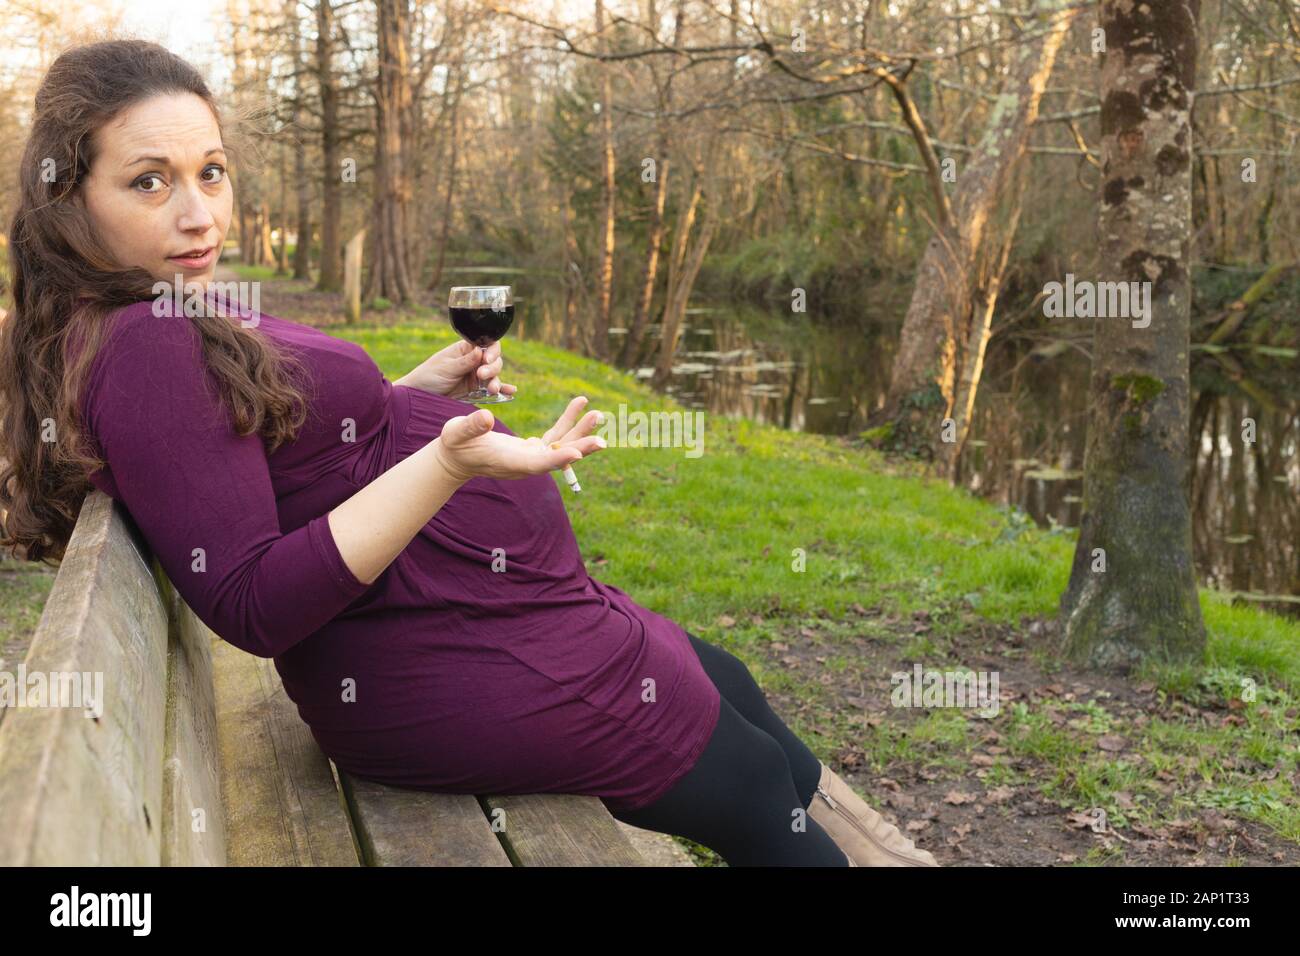 Pregnant woman with alcohol and cigarette in her hands, sitting on the bench in park and looking at camera with questioning look and shrugging gesture Stock Photo